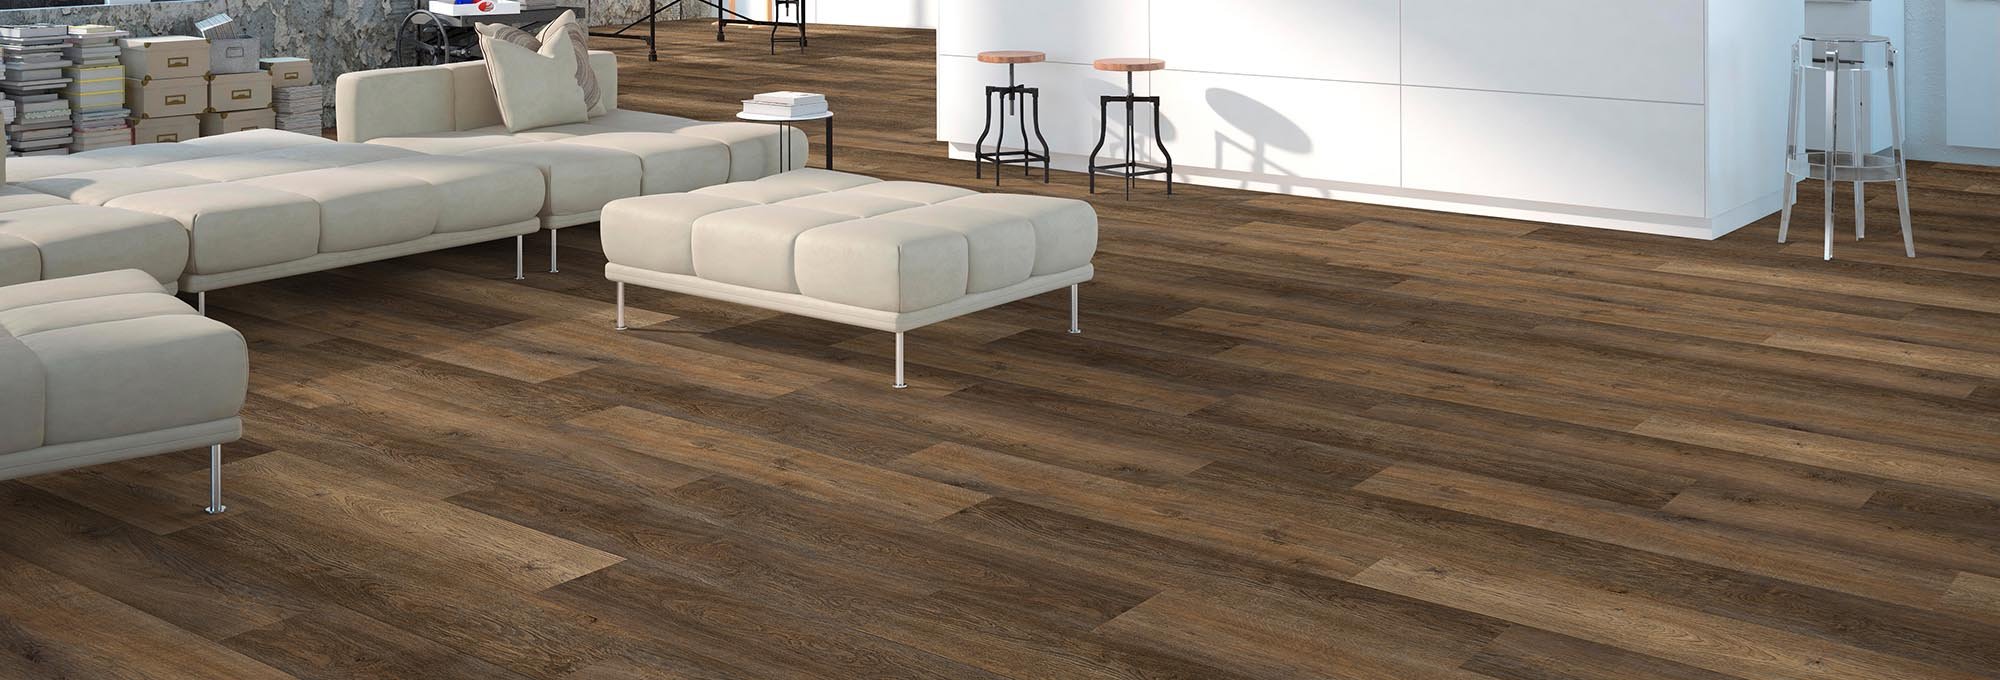 Shop Flooring Products from COLORTILE of Kennewick in Kennewick, WA